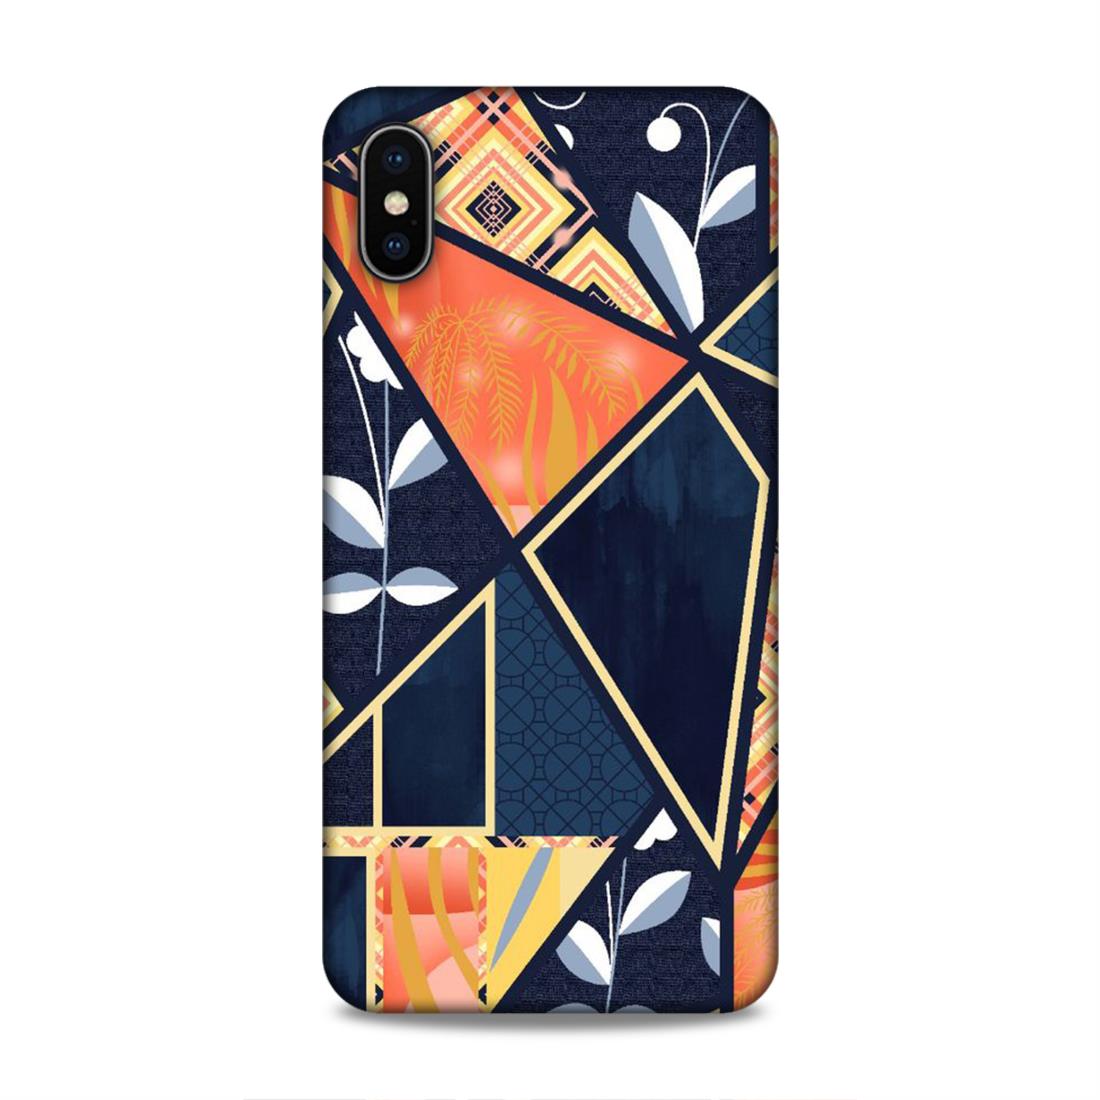 Floral Textile Pattern Hard Back Case For Apple iPhone XS Max